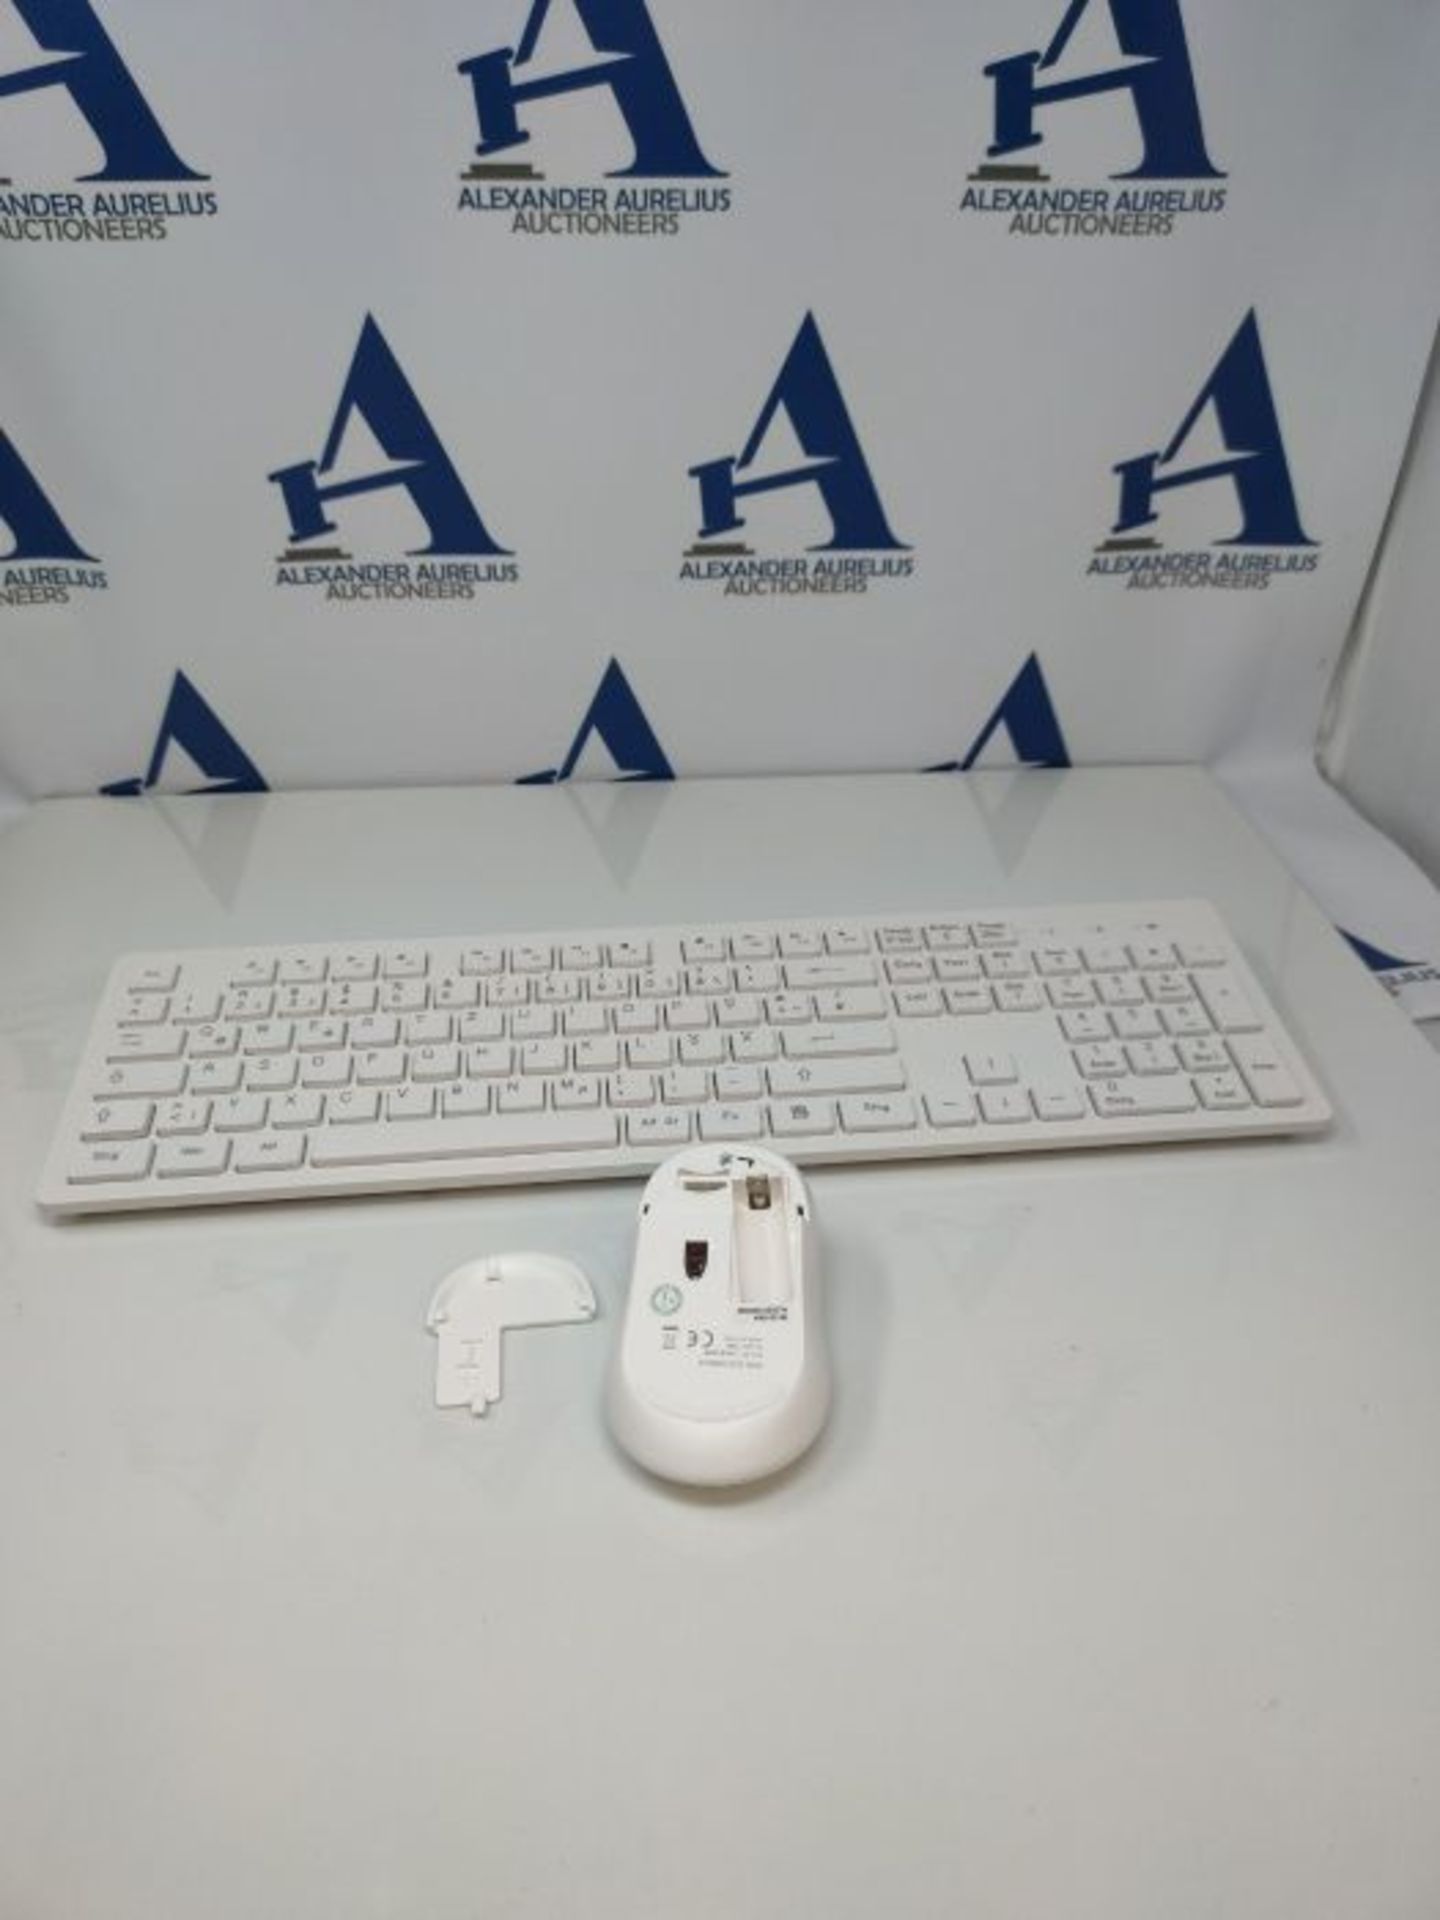 [INCOMPLETE] TedGem wireless keyboard mouse set with 2 in 1 USB receiver for PC, compu - Image 2 of 2